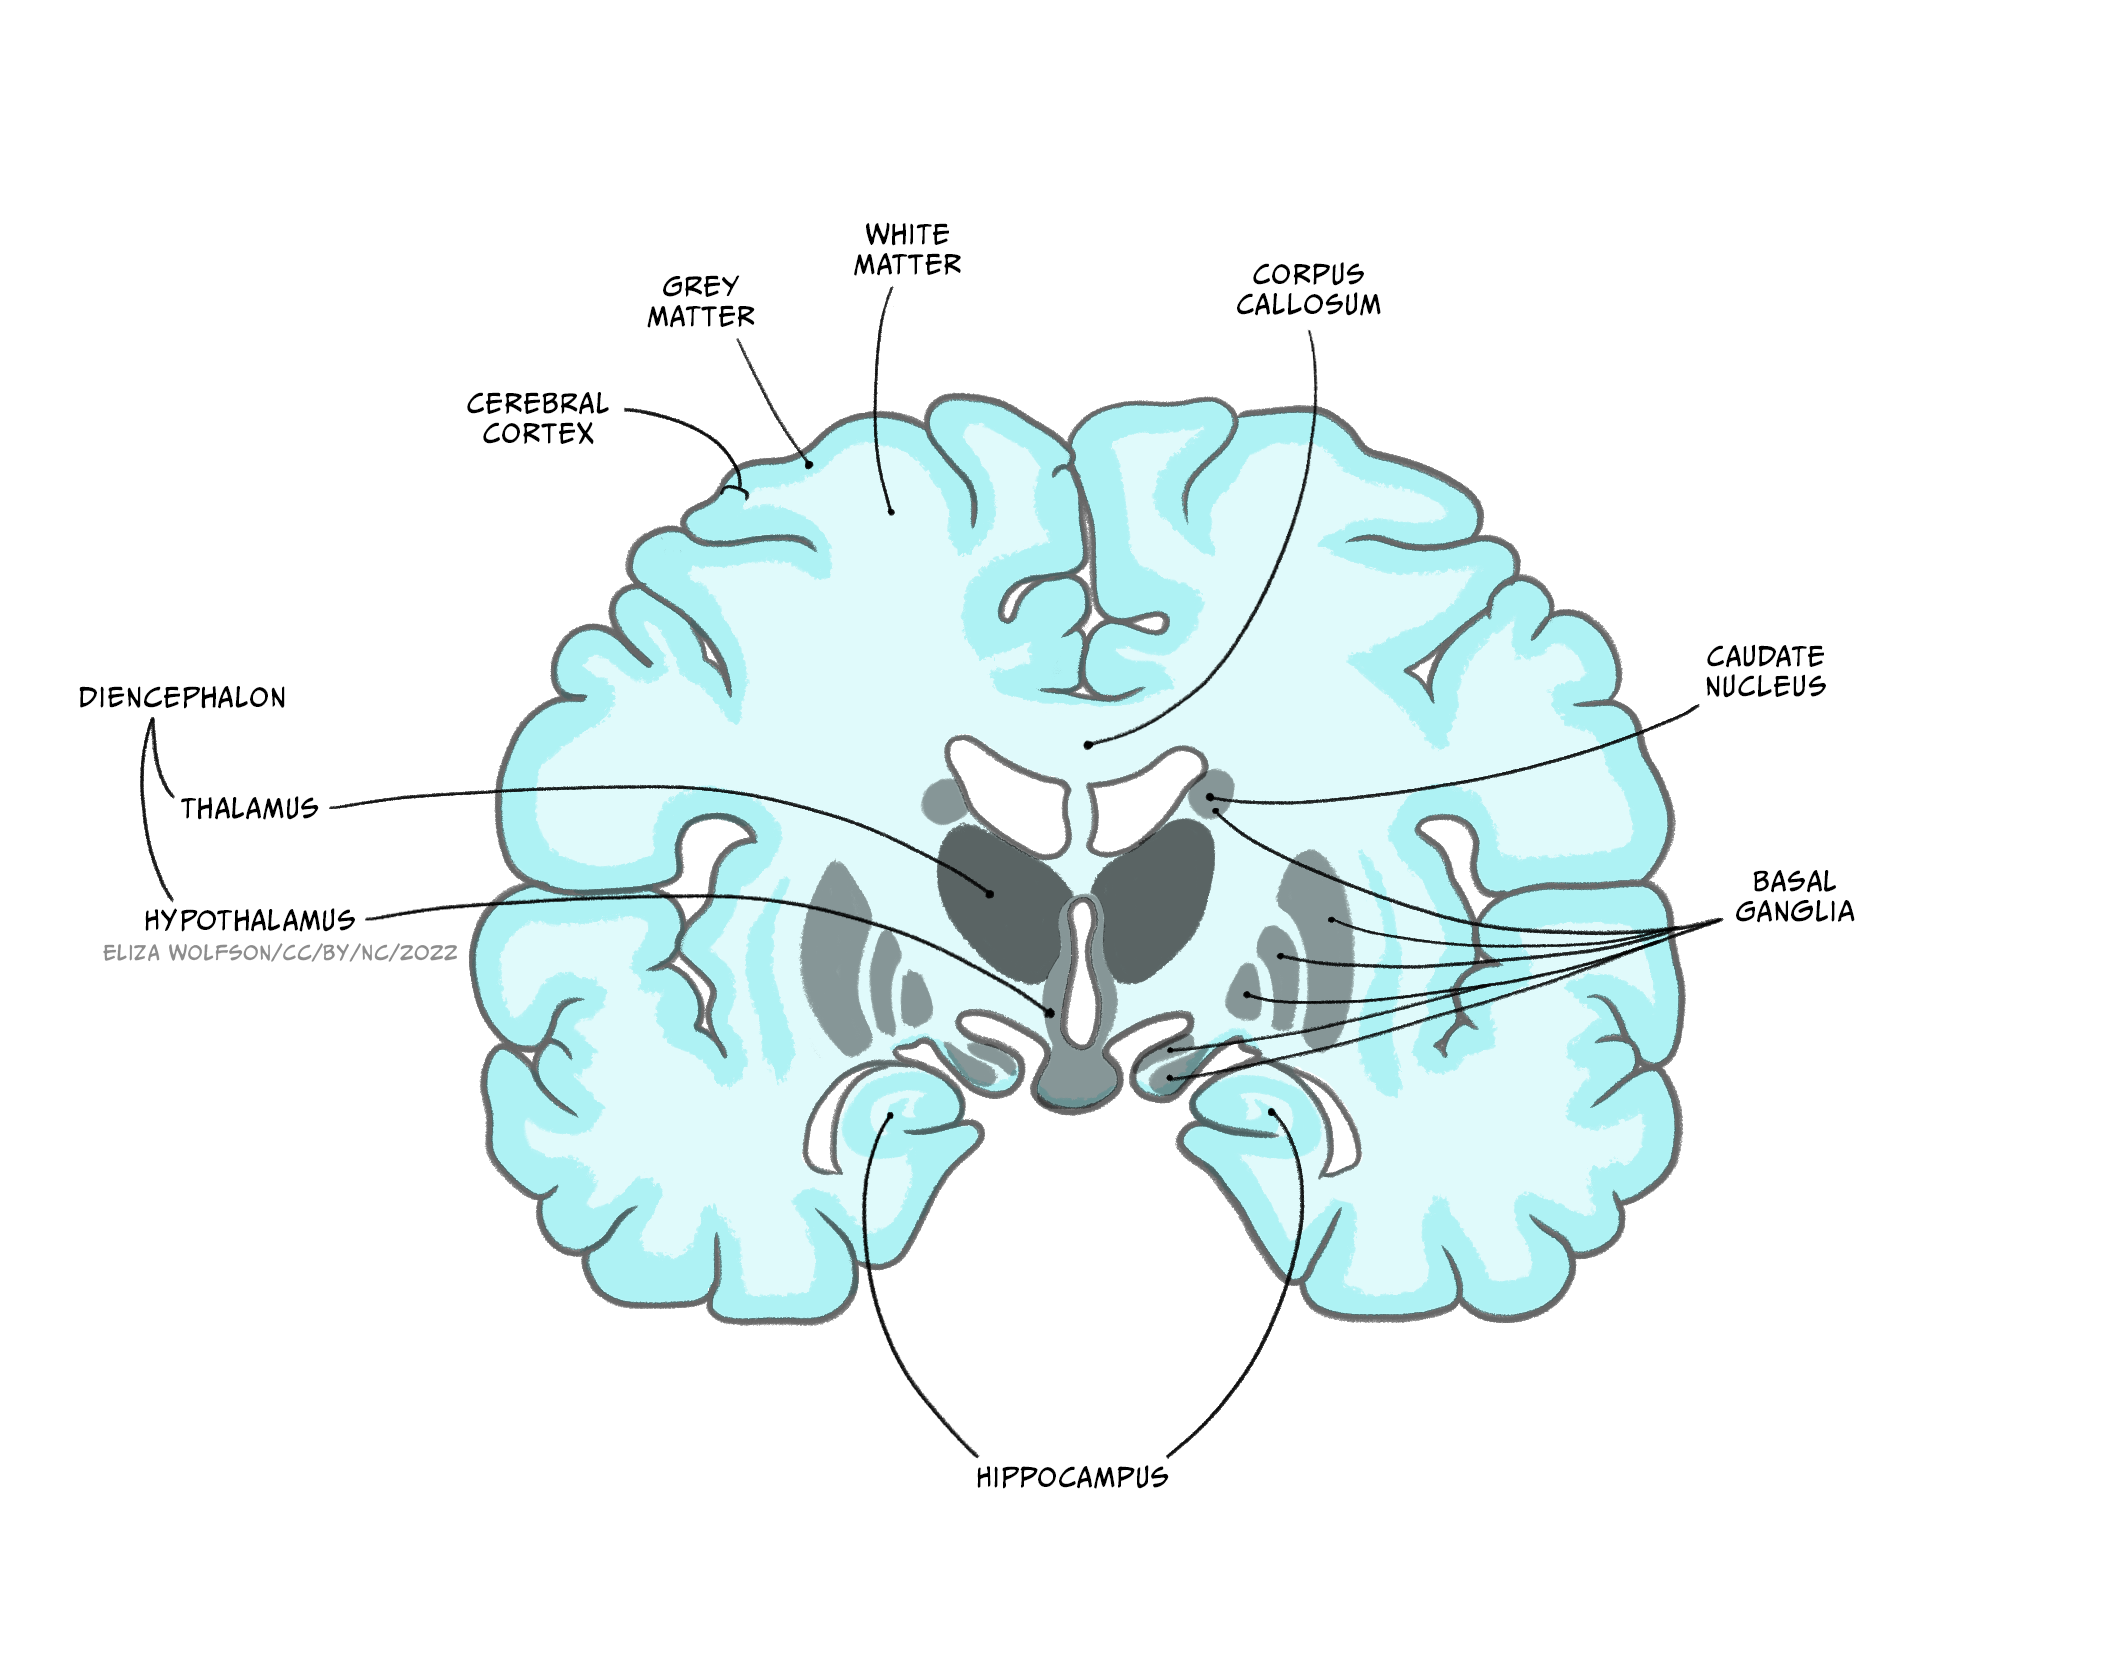 An anatomical slice drawing of the coronal section of the forebrain, showing the location of the basal ganglia, caudate nucleus, hypothalamus and more